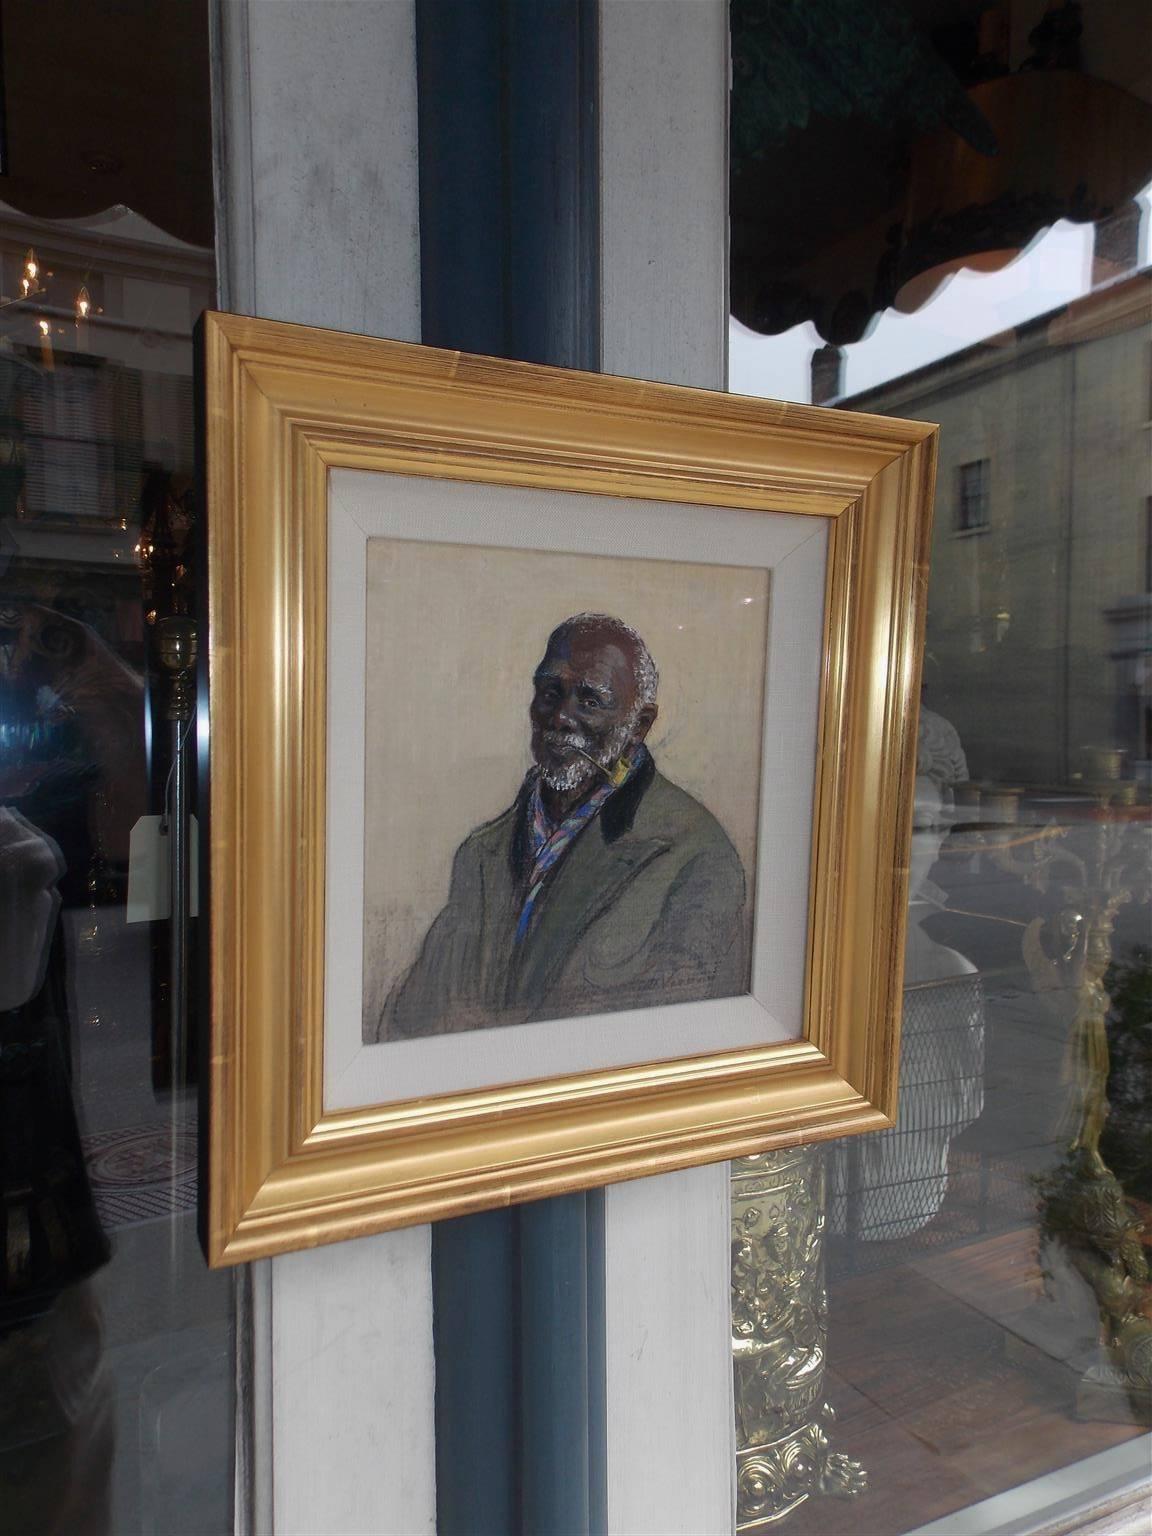 Elizabeth O'Neil Verner pastel on silk of Negro man with a black collar shirt and corn cob pipe under glass in gilt frame. Signed in lower right corner, early 20th century, American, 20th century.

 